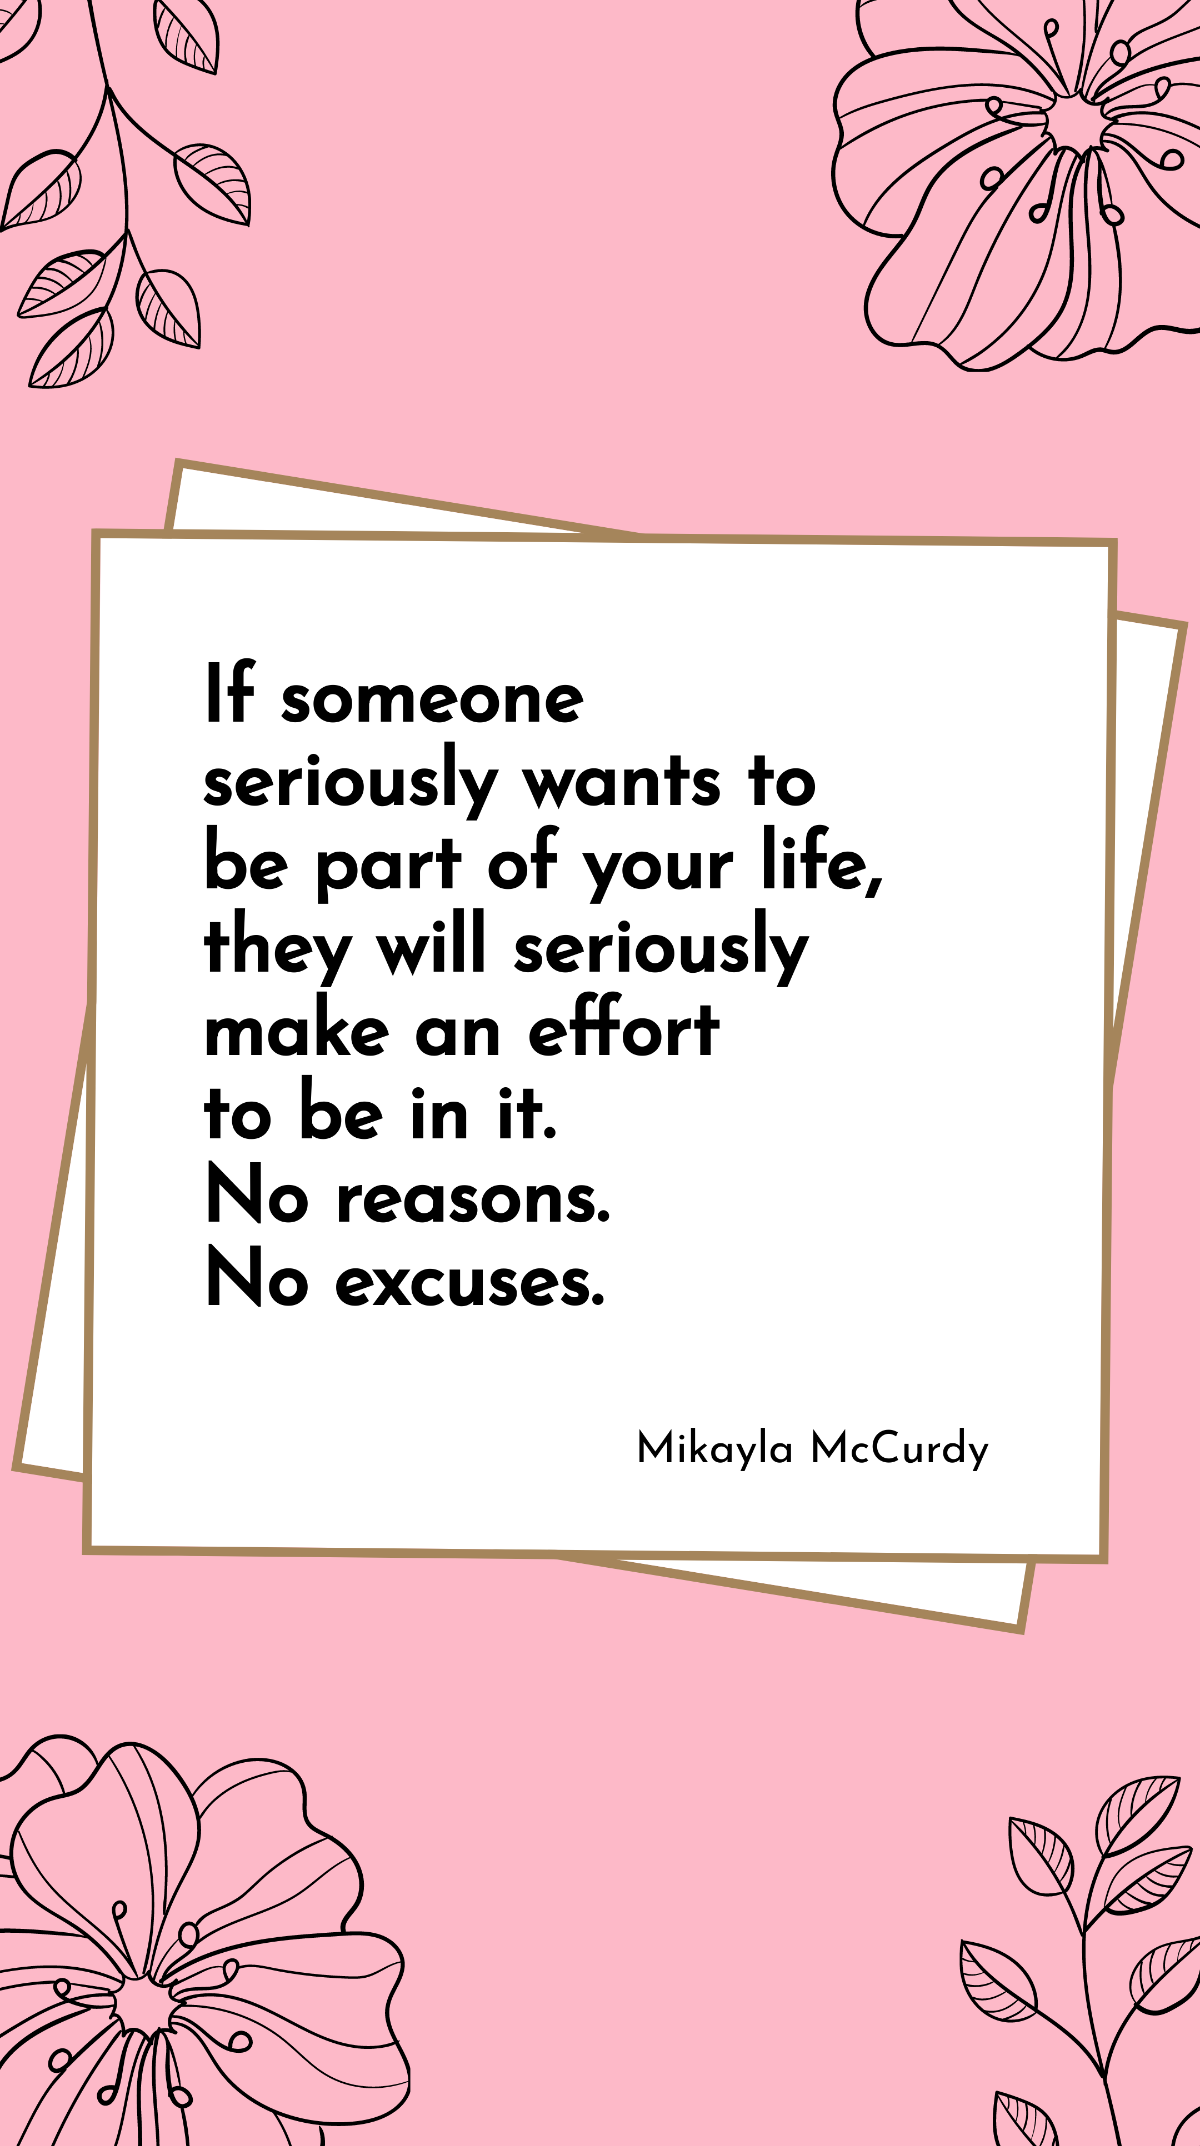 Mikayla McCurdy - If someone seriously wants to be part of your life, they will seriously make an effort to be in it. No reasons. No excuses. 